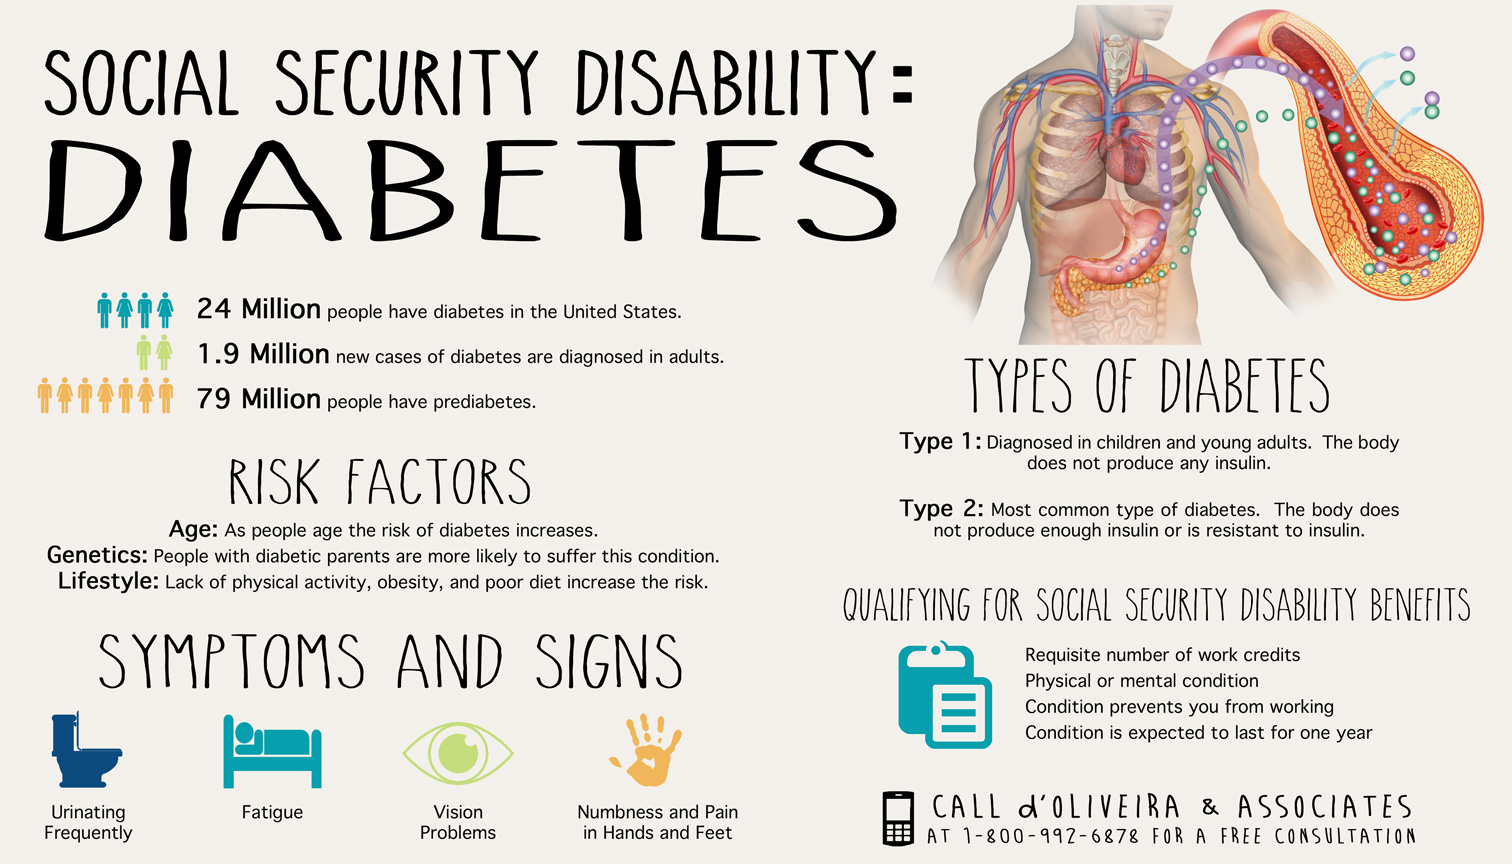 Social Security Disability Benefits Infographic with statistics